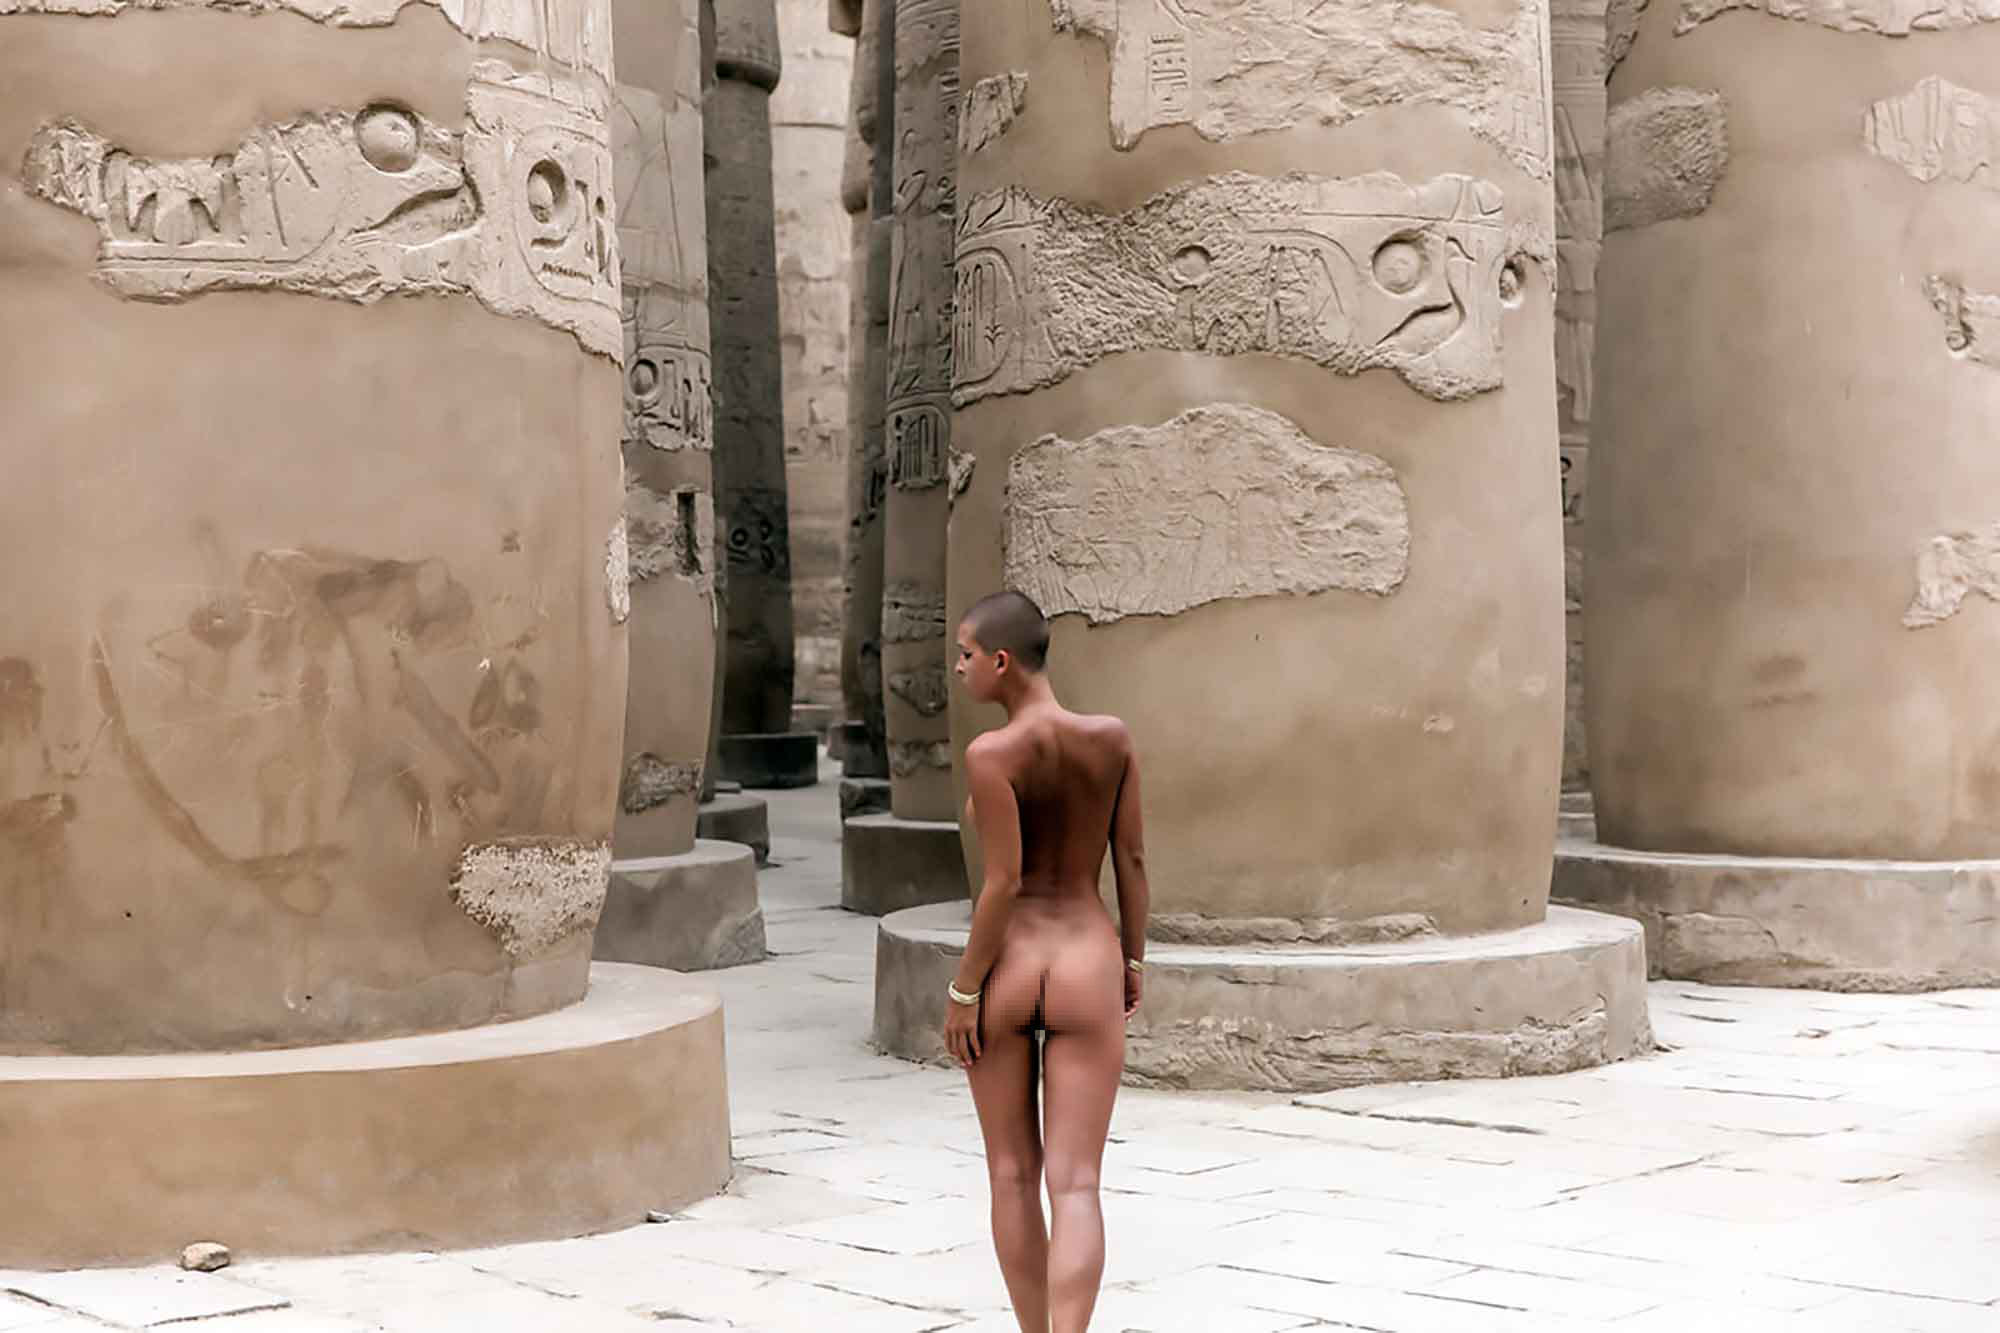 Egyptian Nude Beauty - Model jailed for naked photoshoot in Egypt